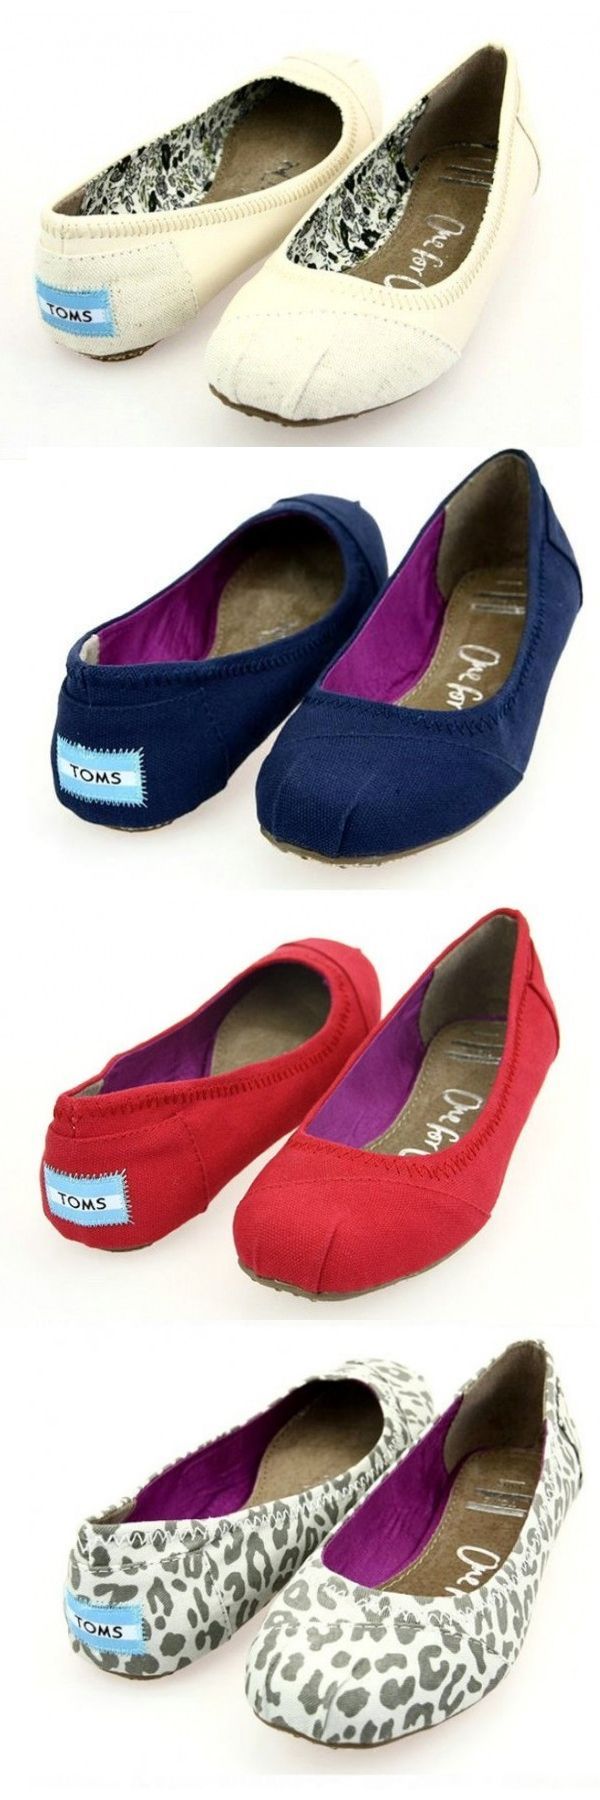 toms  site!!Check it out! It Brings You Most Wonderful Life! $19